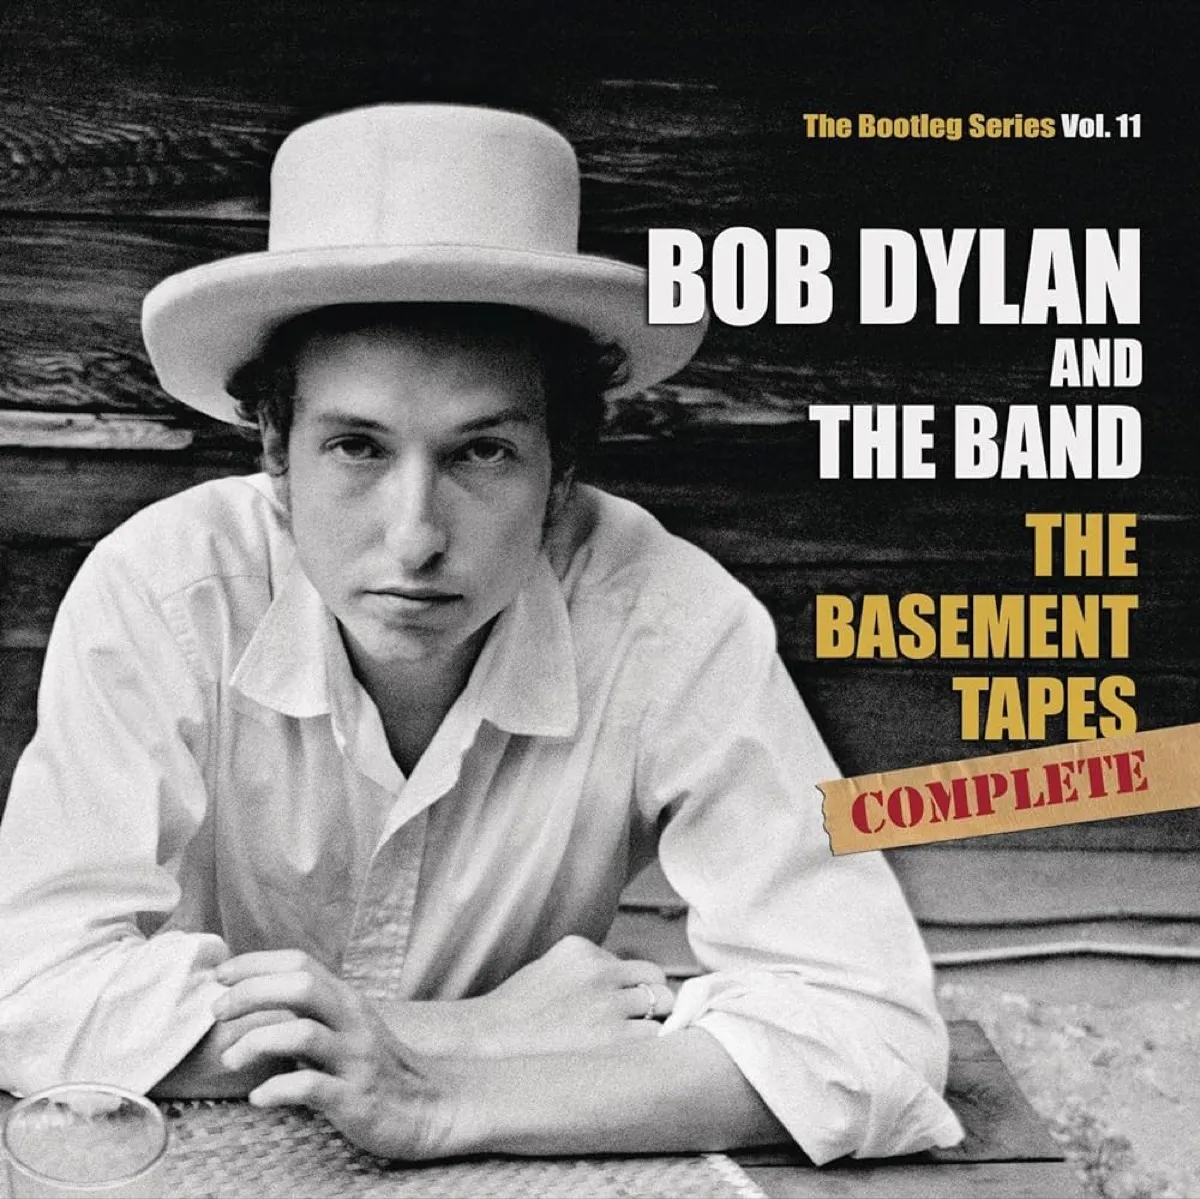 "The Bootleg Series Vol. 11: The Basement Tapes Complete" by Bob Dylan album cover